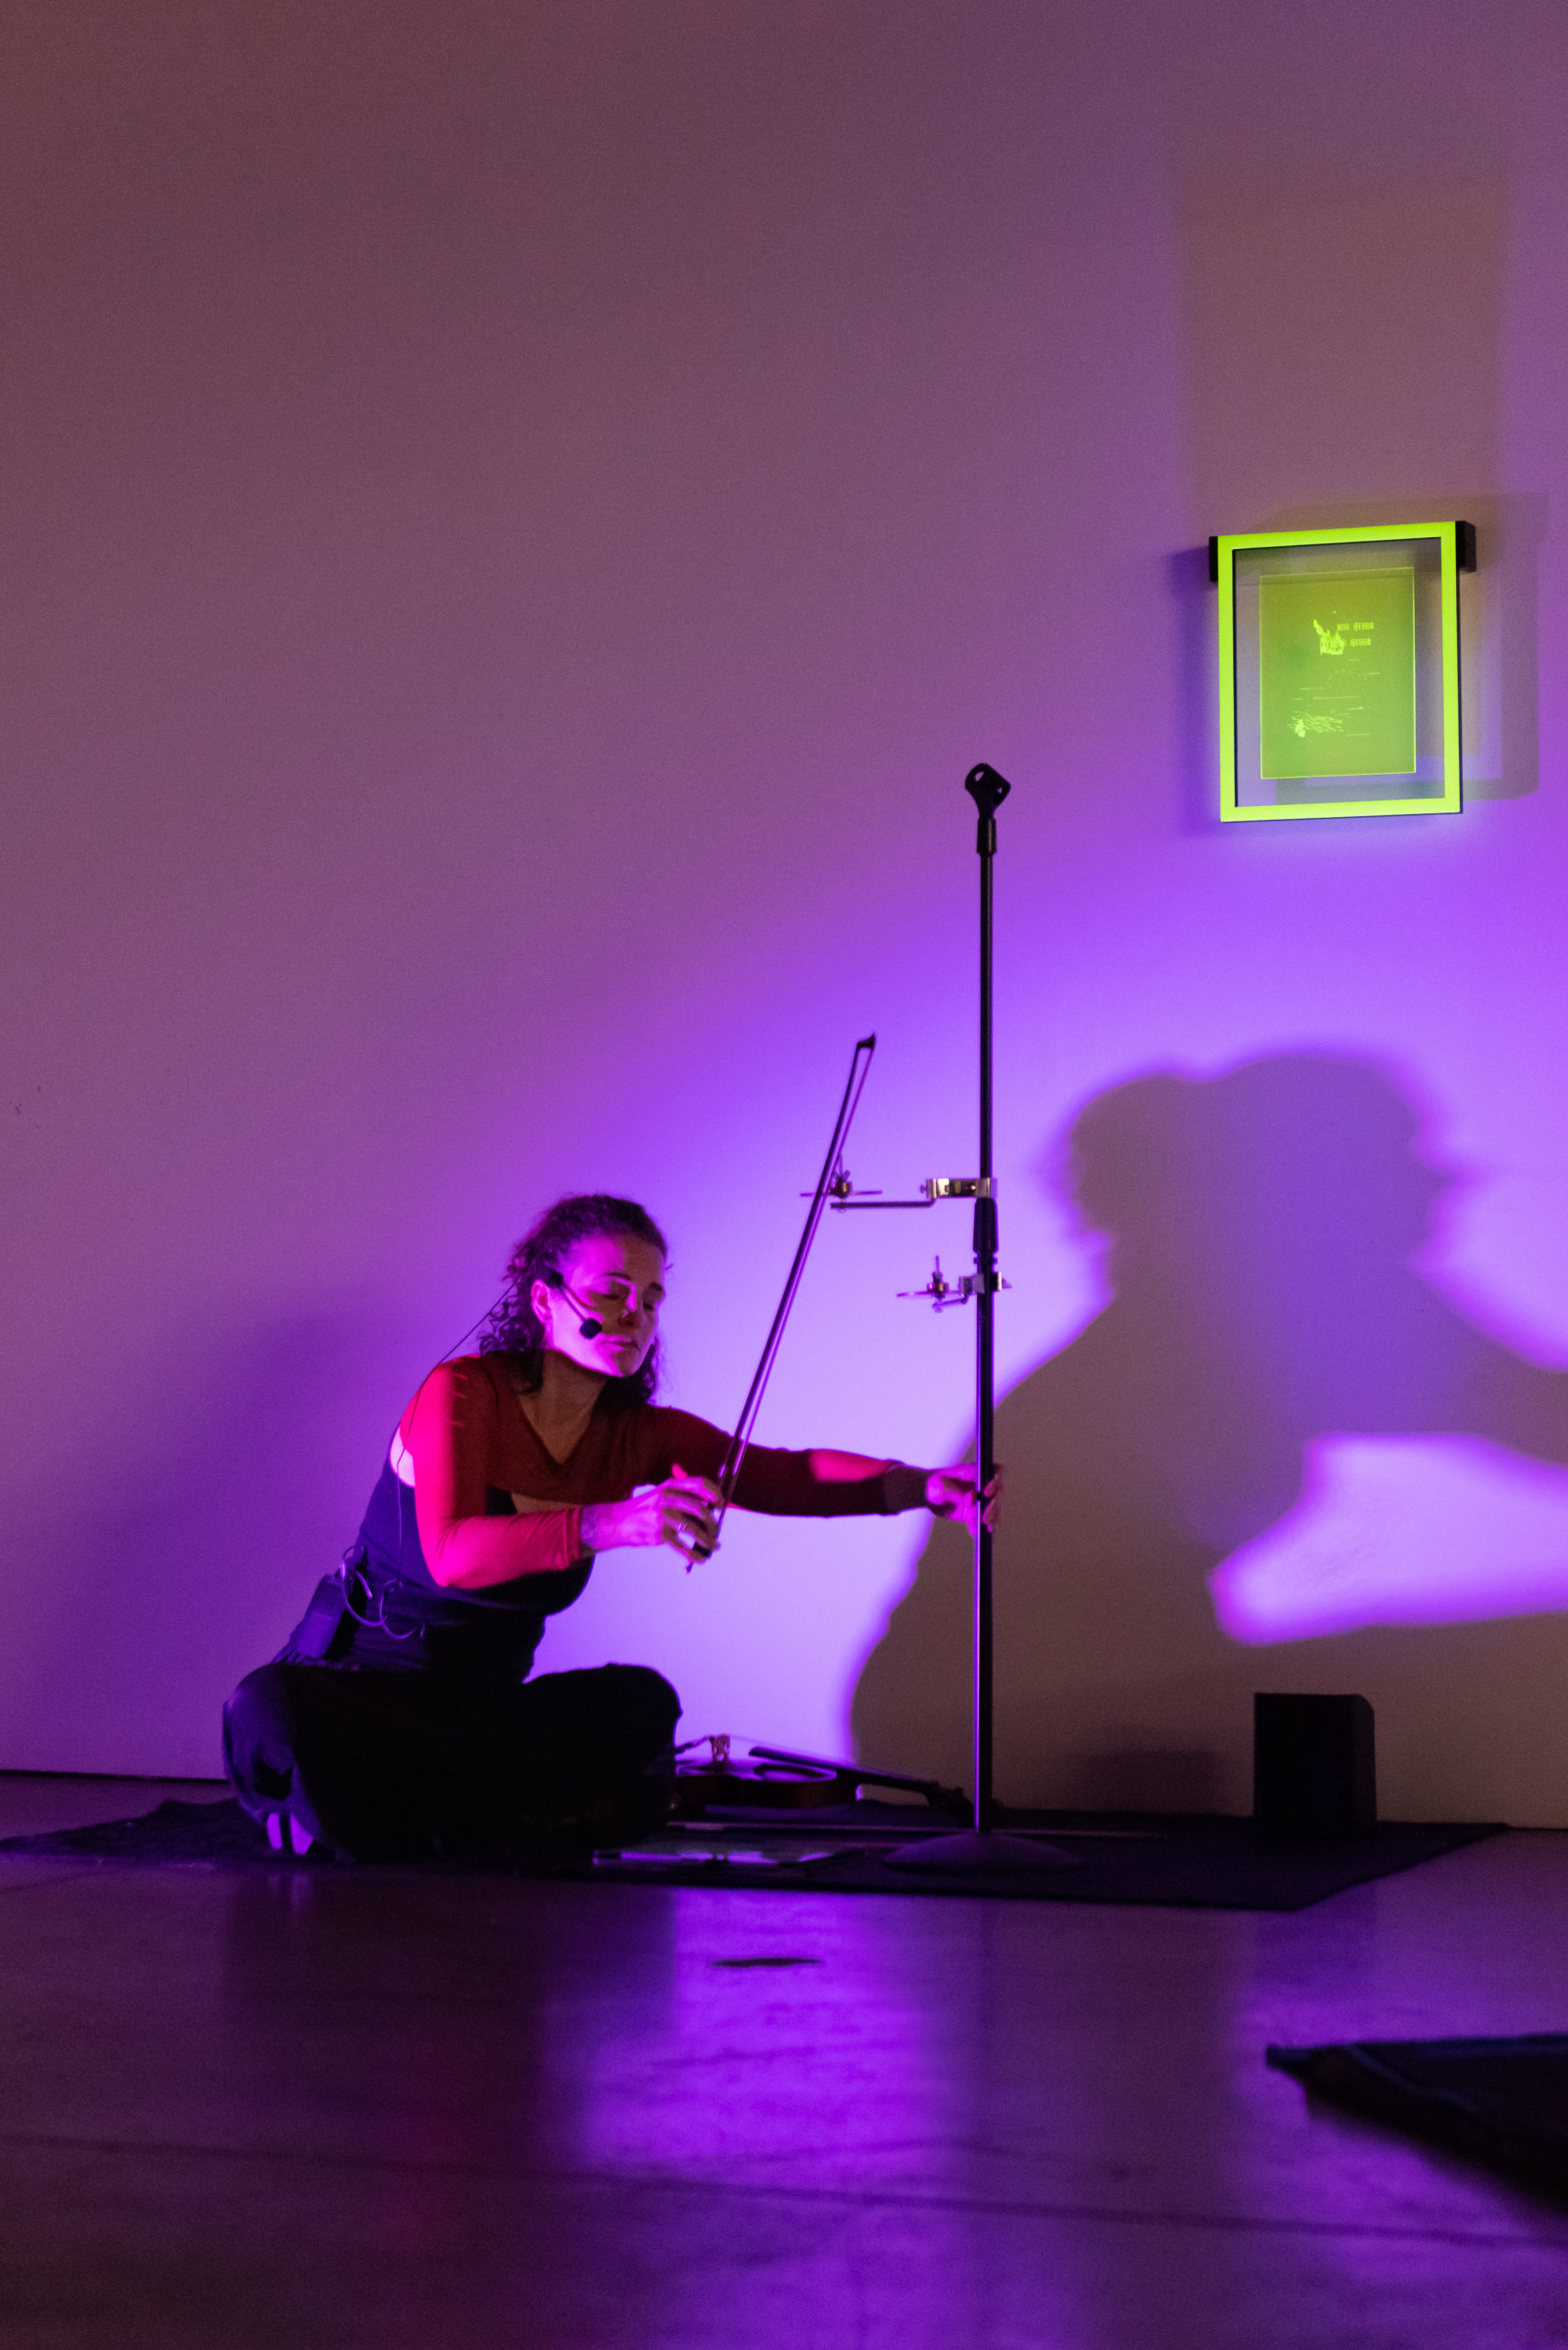 A woman seated on the ground takes a violin bow against a small symbal, her shadow cast behind her and a rectangular piece of translucent yellow acrylic hanging above it.